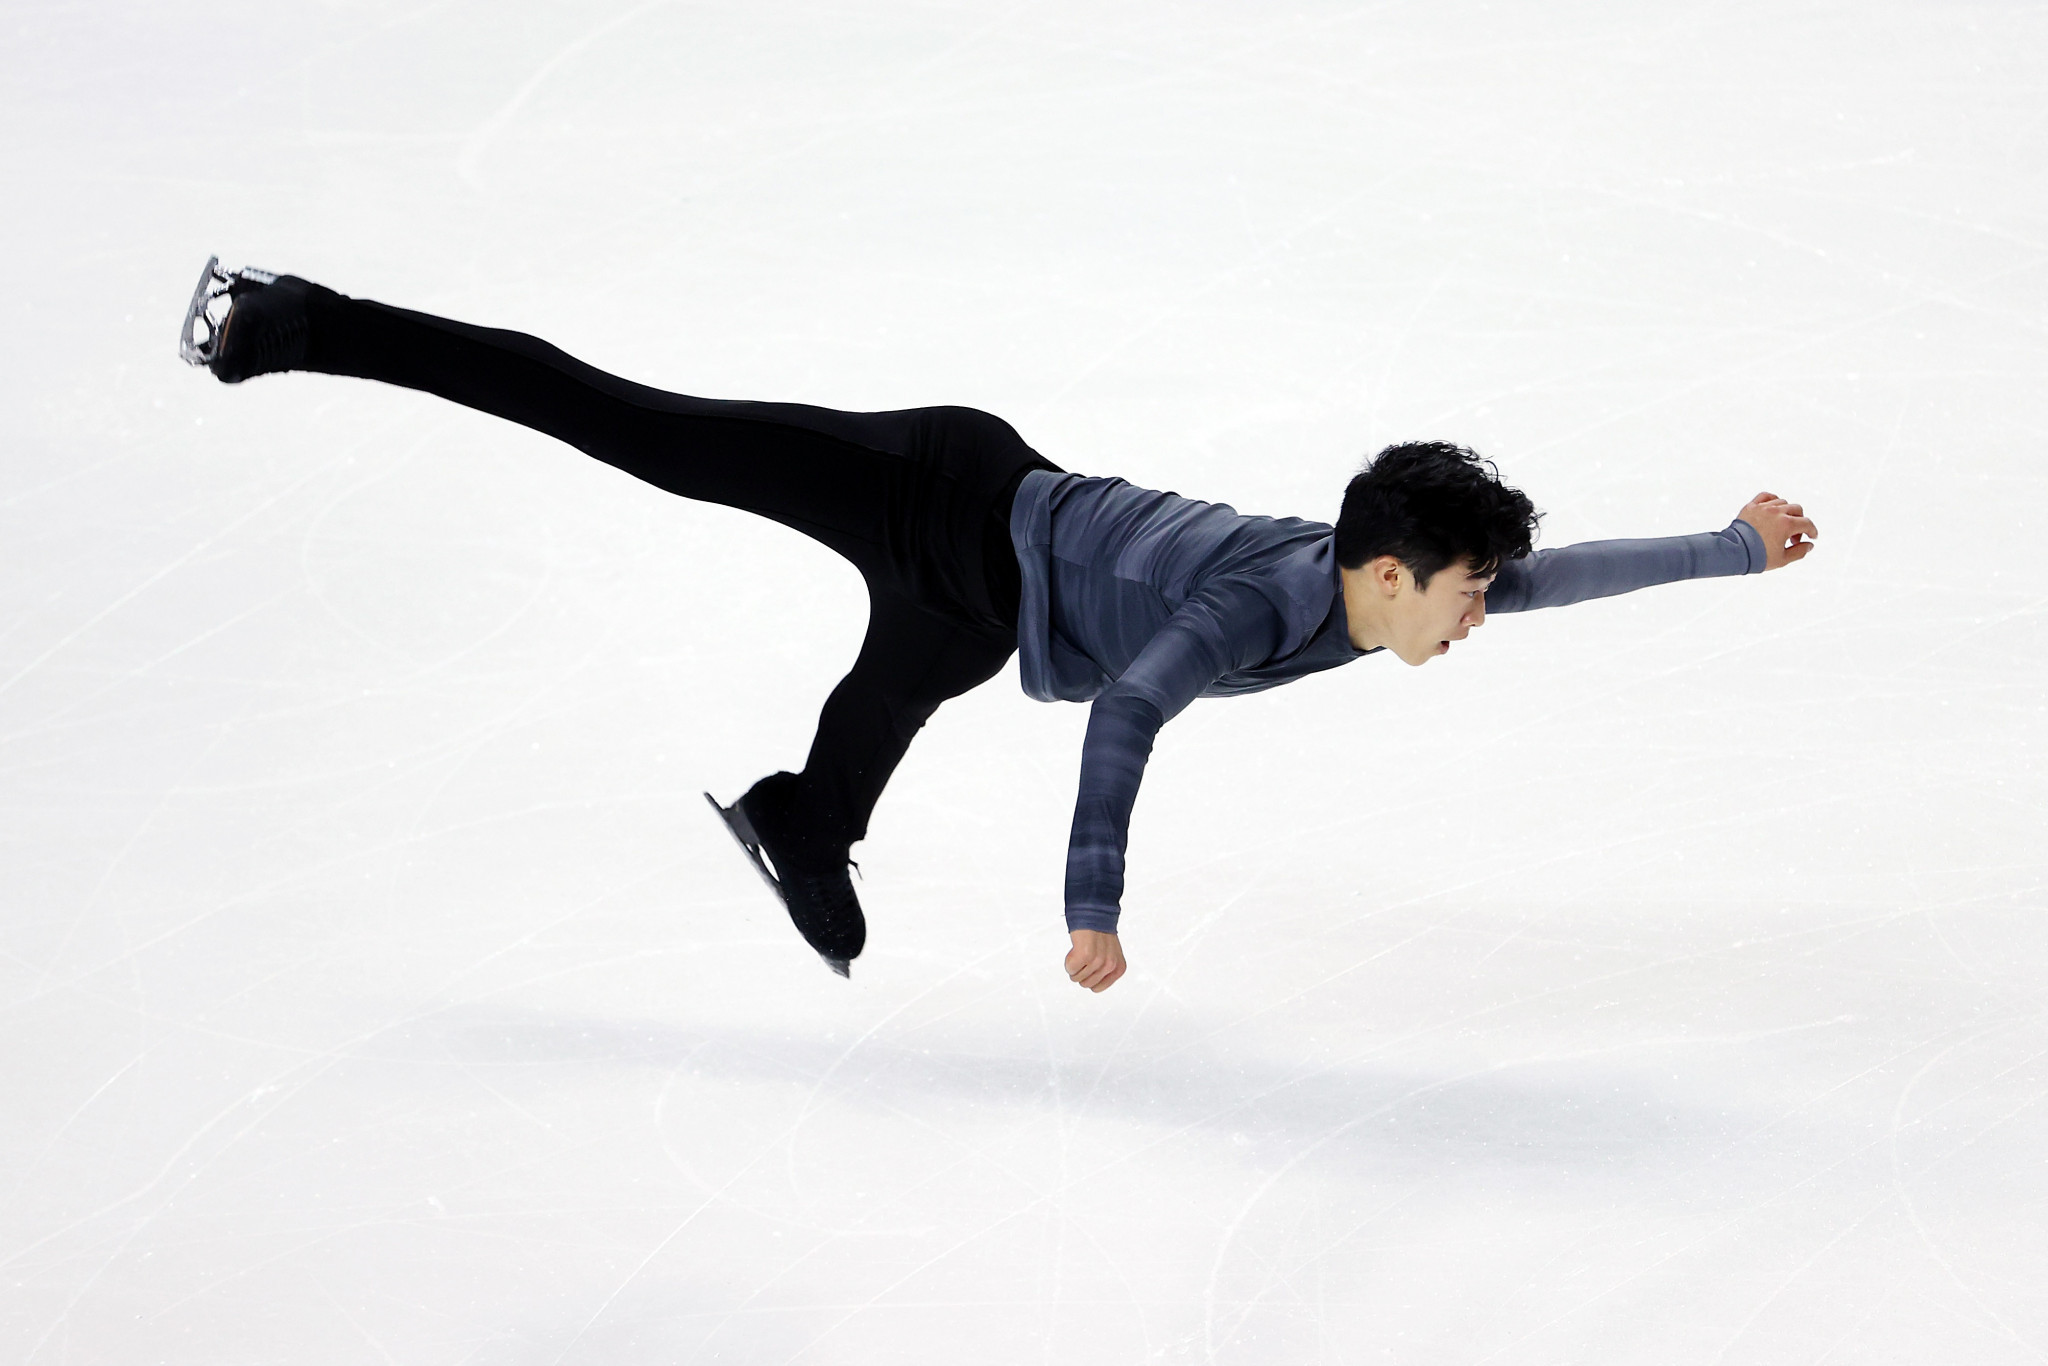 Three-time world champion Nathan Chen produced a couple of mistakes in his opening routine at Skate America to leave him in third place ©Getty Images